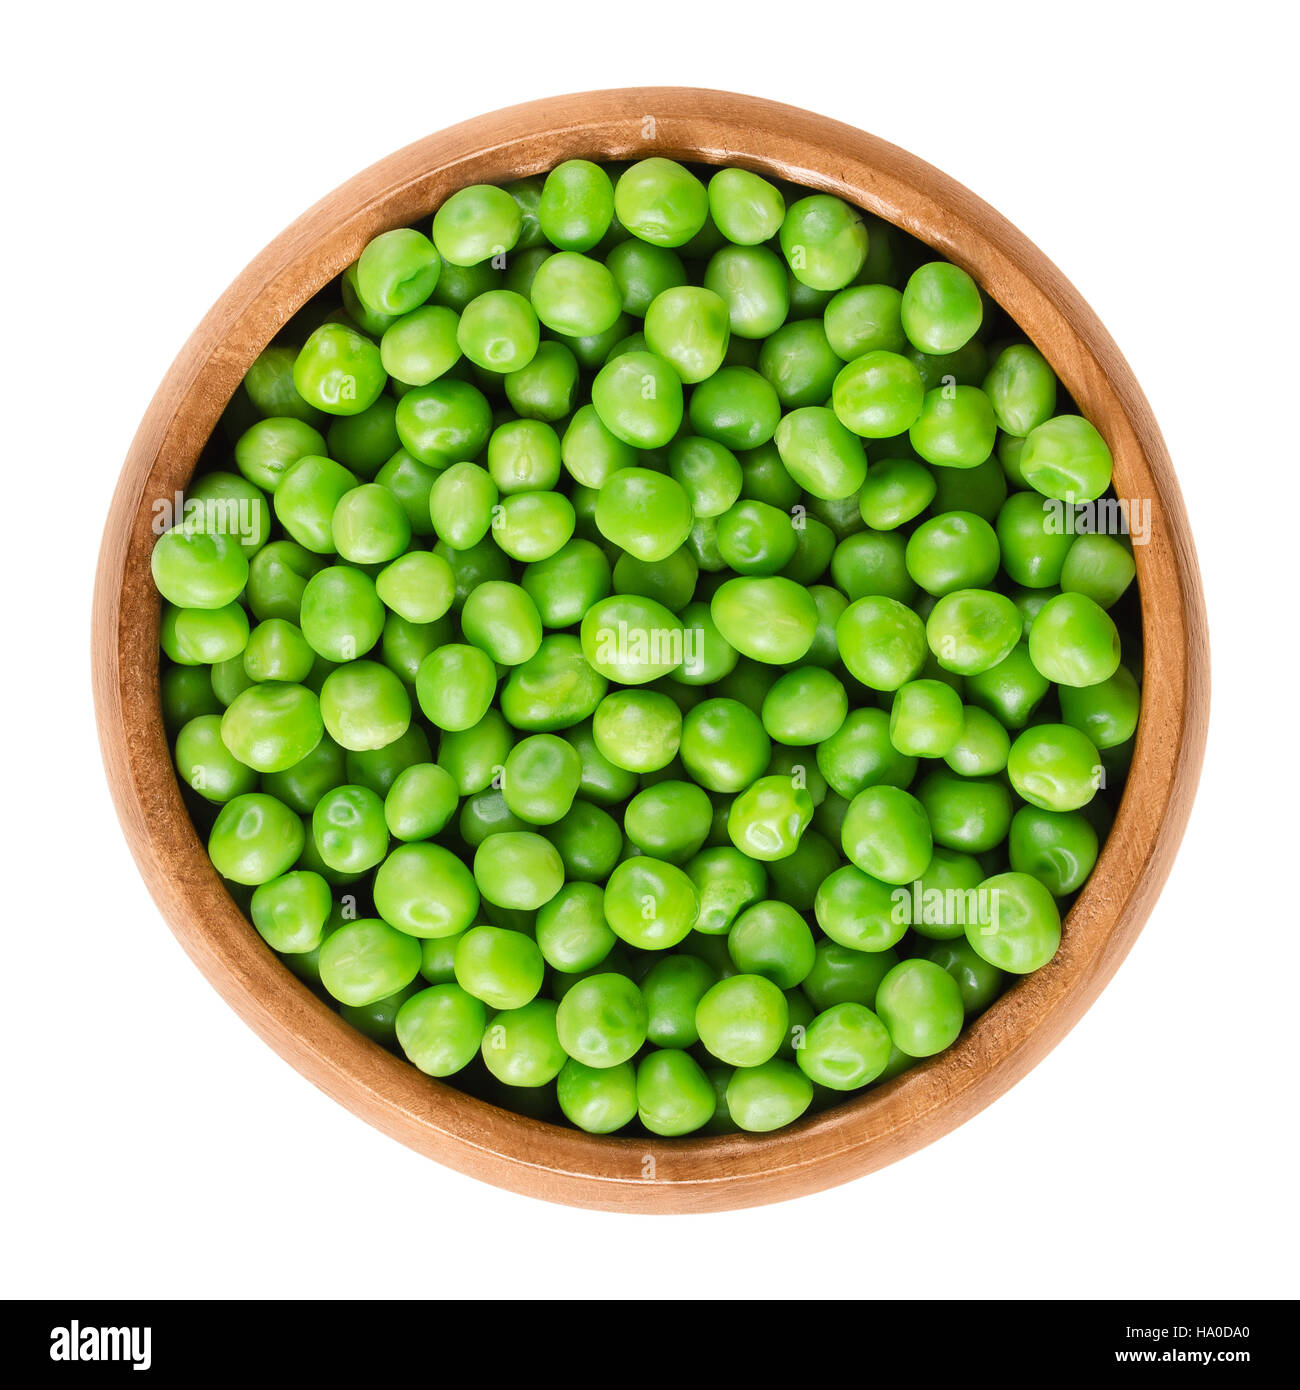 Raw peas in wooden bowl. Green small spherical seeds of the pod fruit Pisum sativum, an edible legume. Isolated macro food photo Stock Photo